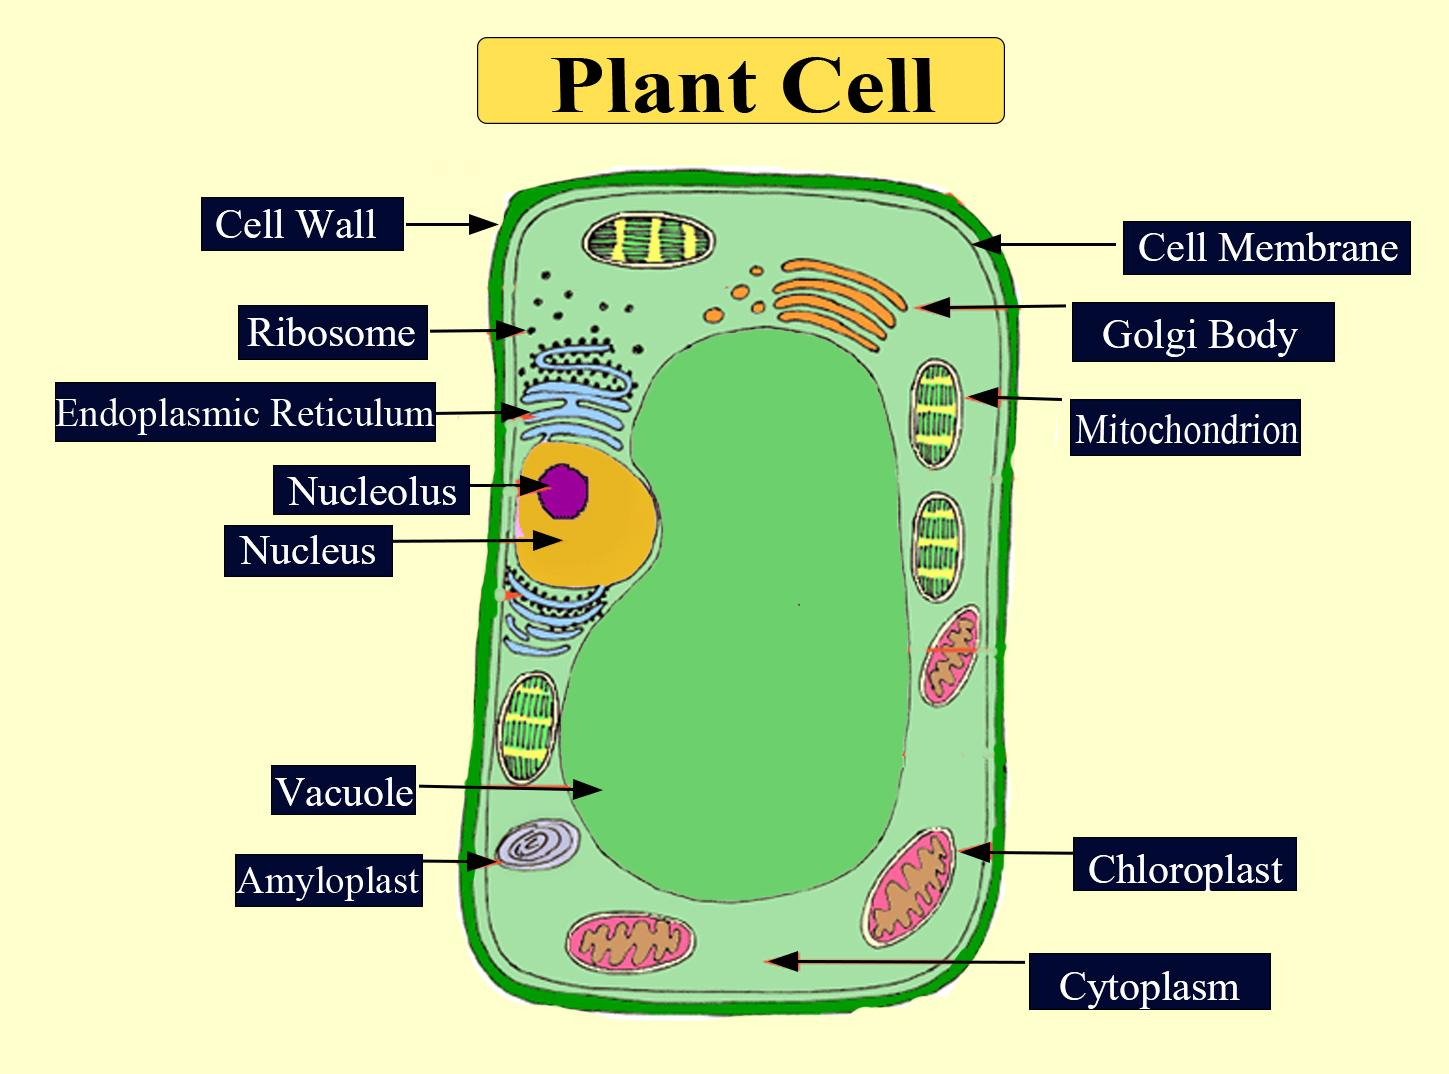 Make sketches of plant and animal cells. State three differences between  them.